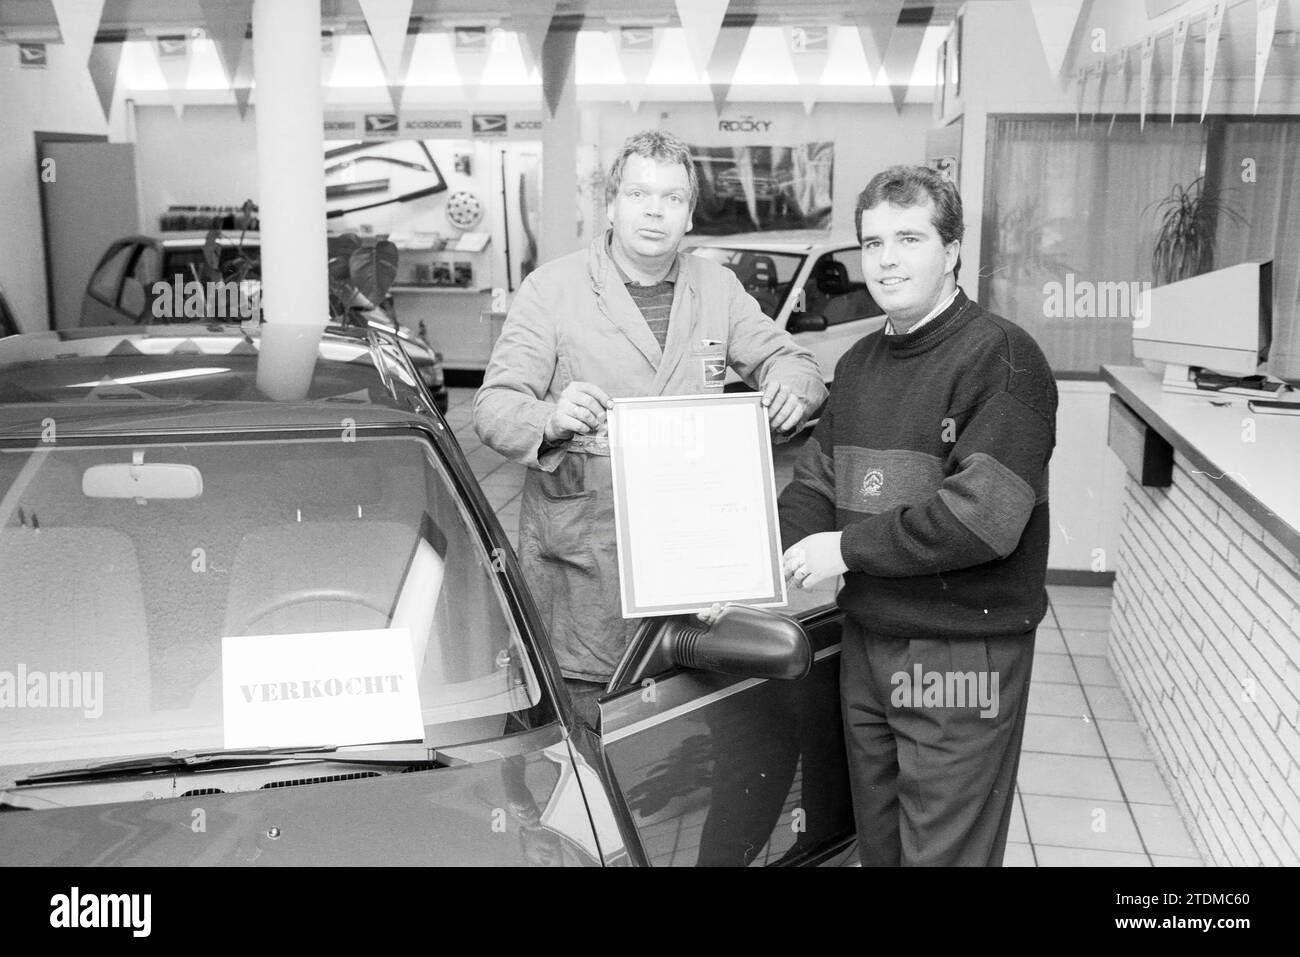 Daihatsu car dealer shows his certificate, 00-12-1989, Whizgle News from the Past, Tailored for the Future. Explore historical narratives, Dutch The Netherlands agency image with a modern perspective, bridging the gap between yesterday's events and tomorrow's insights. A timeless journey shaping the stories that shape our future Stock Photo